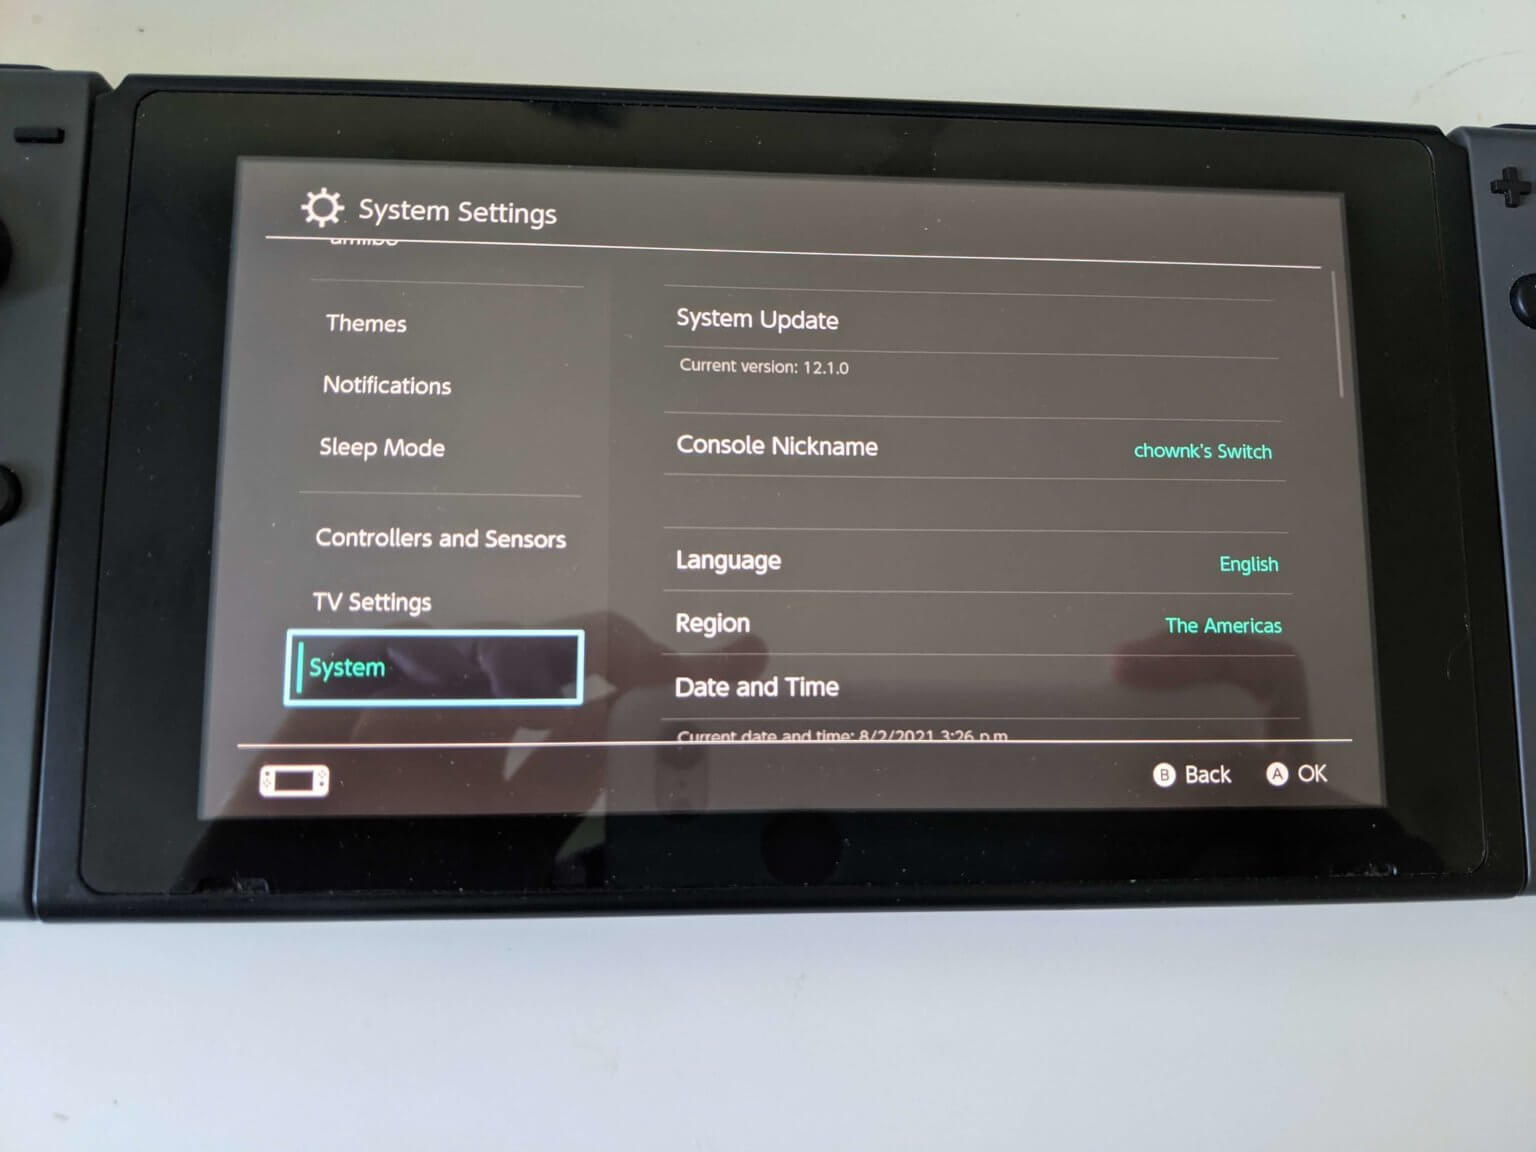 How To Change The Language On The Nintendo Switch Console - Switcher.gg